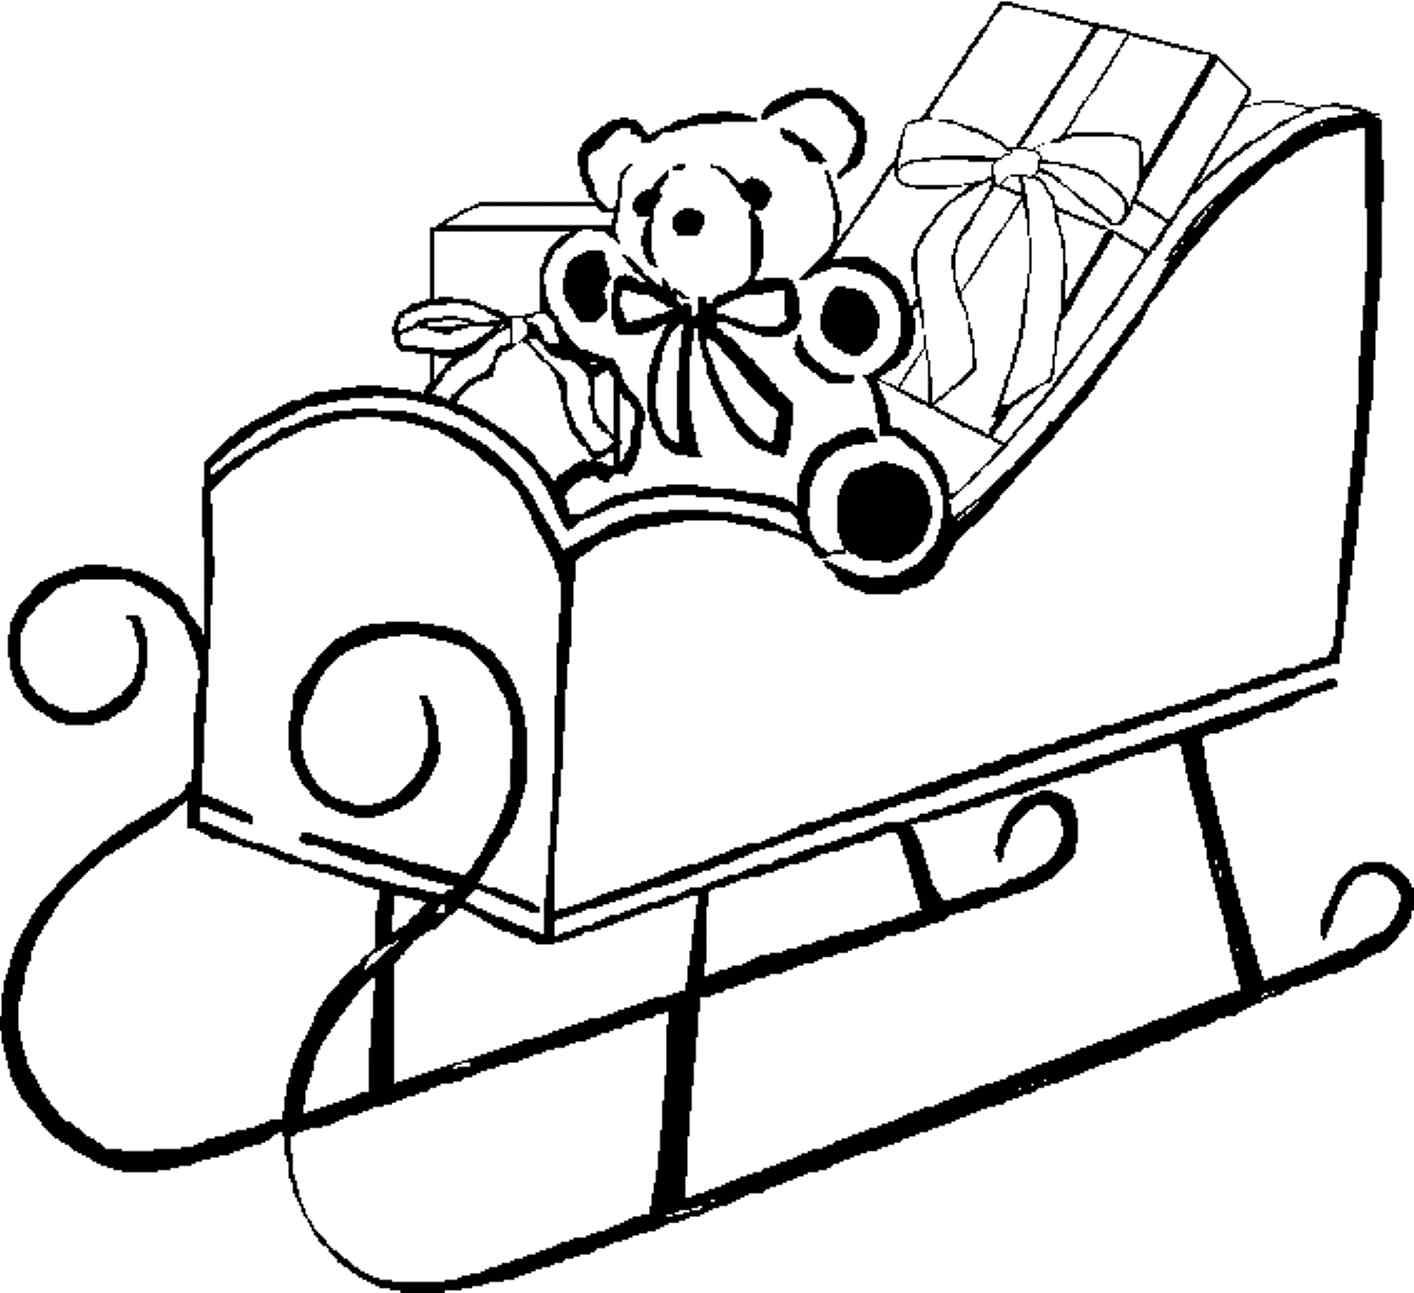 Sleds Are Carrying Long-Awaited Gifts Coloring Page